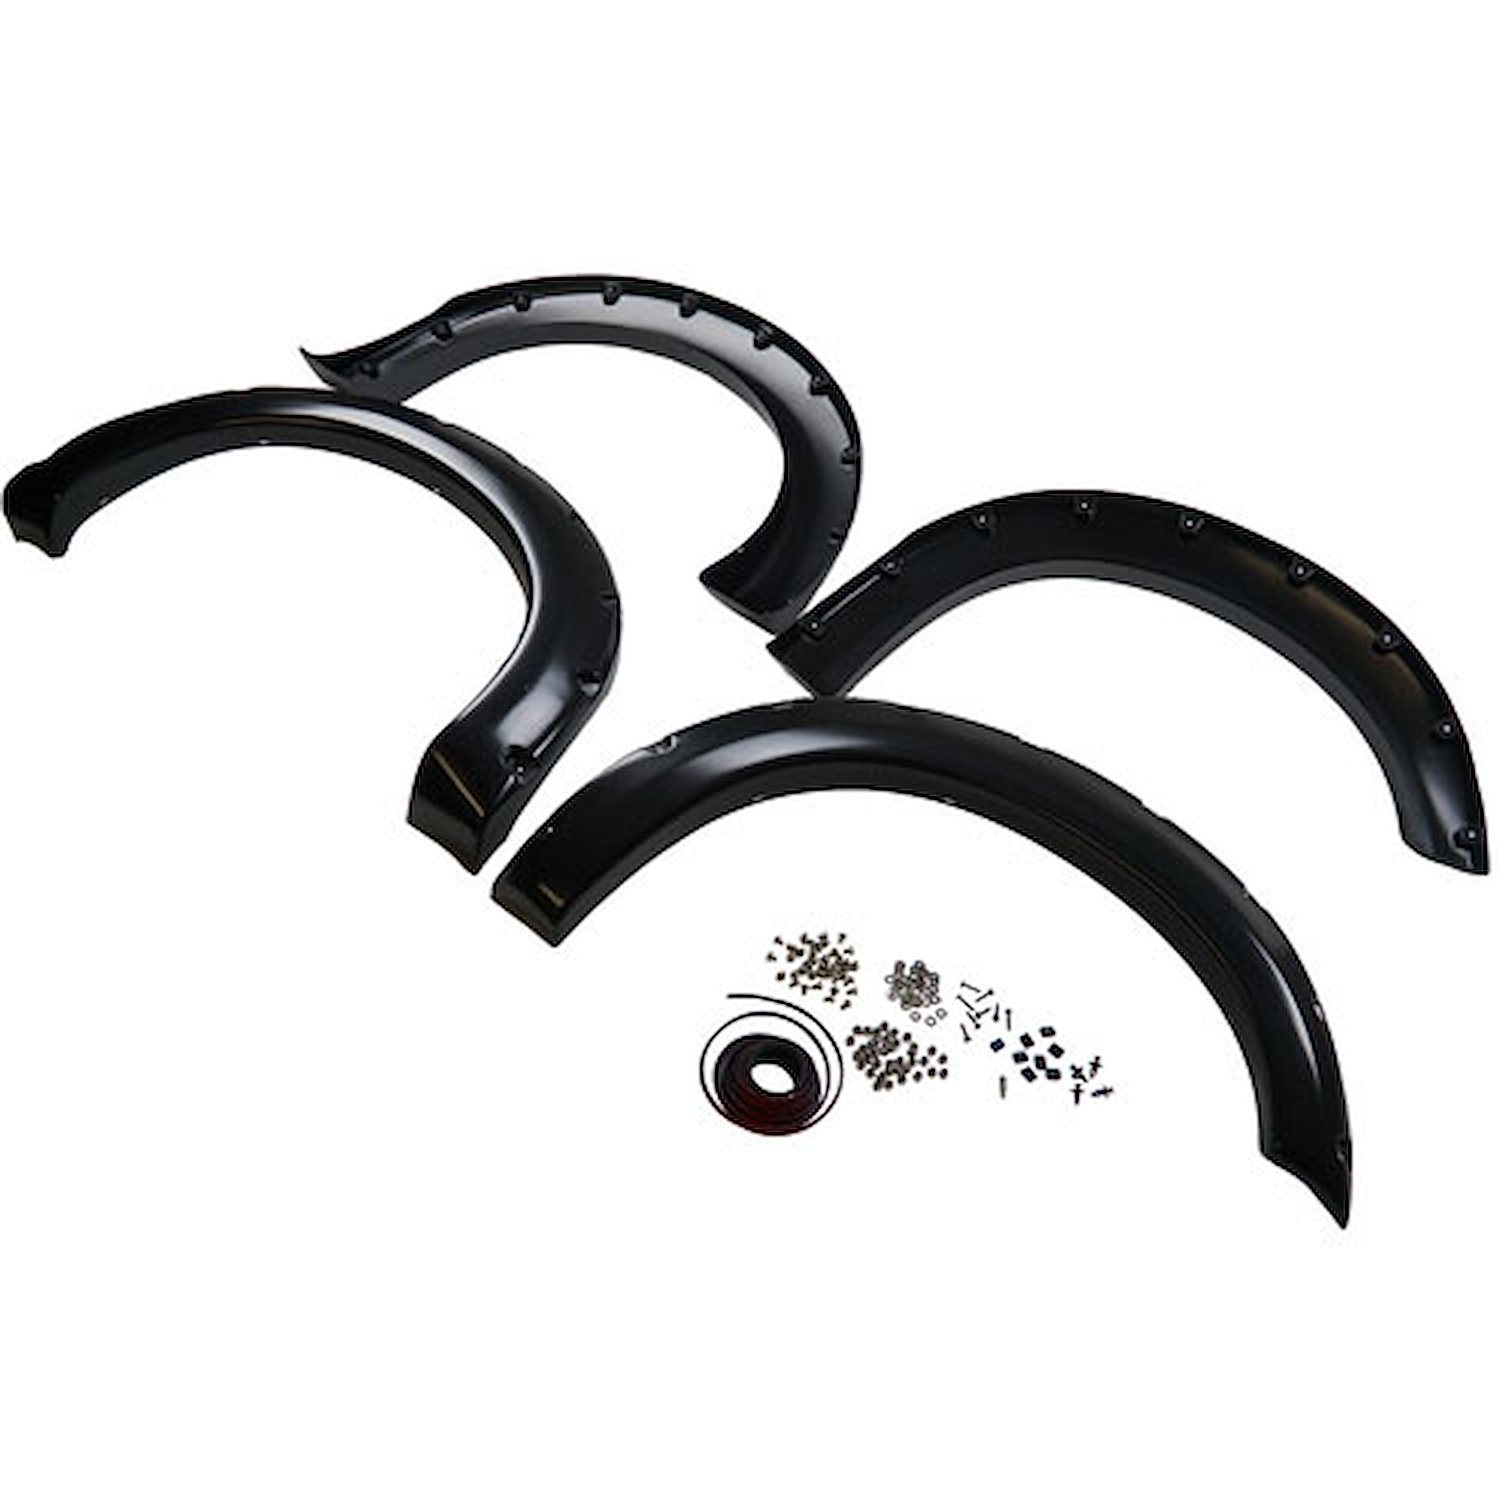 Bolt Style Fender Flares 2008-2010 F-250/F-350